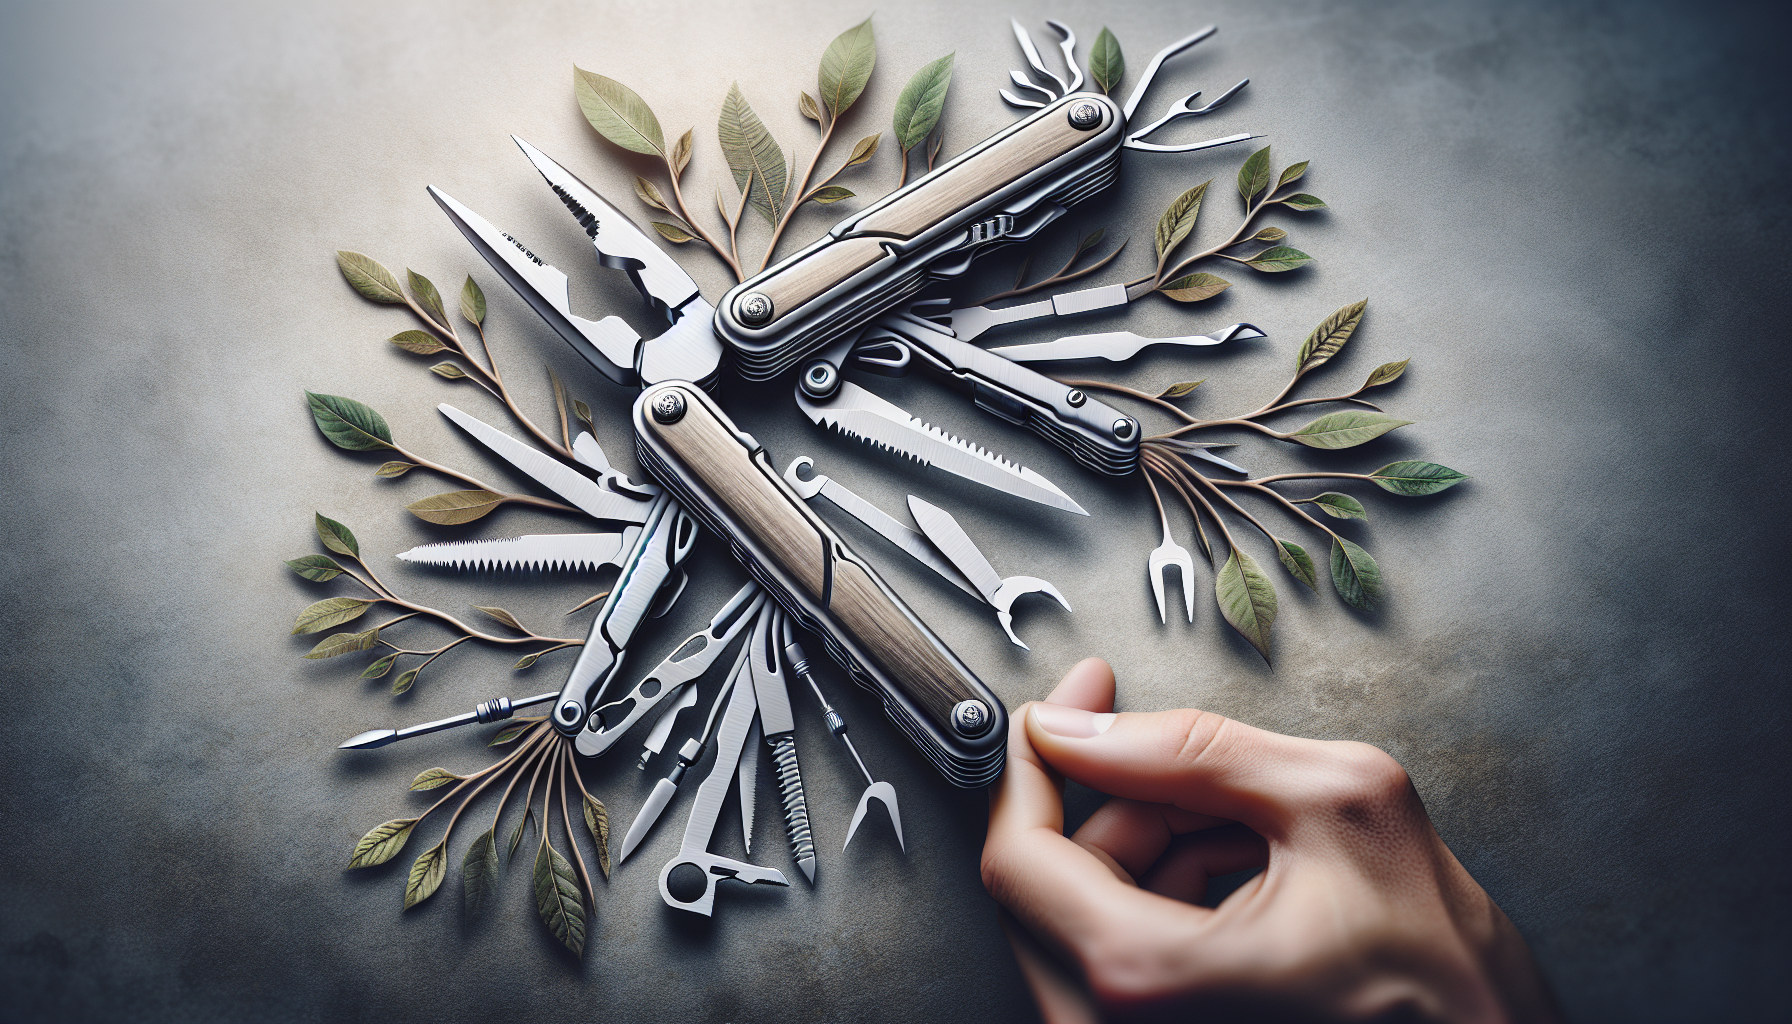 10 essential multitools for every outdoor enthusiast 2